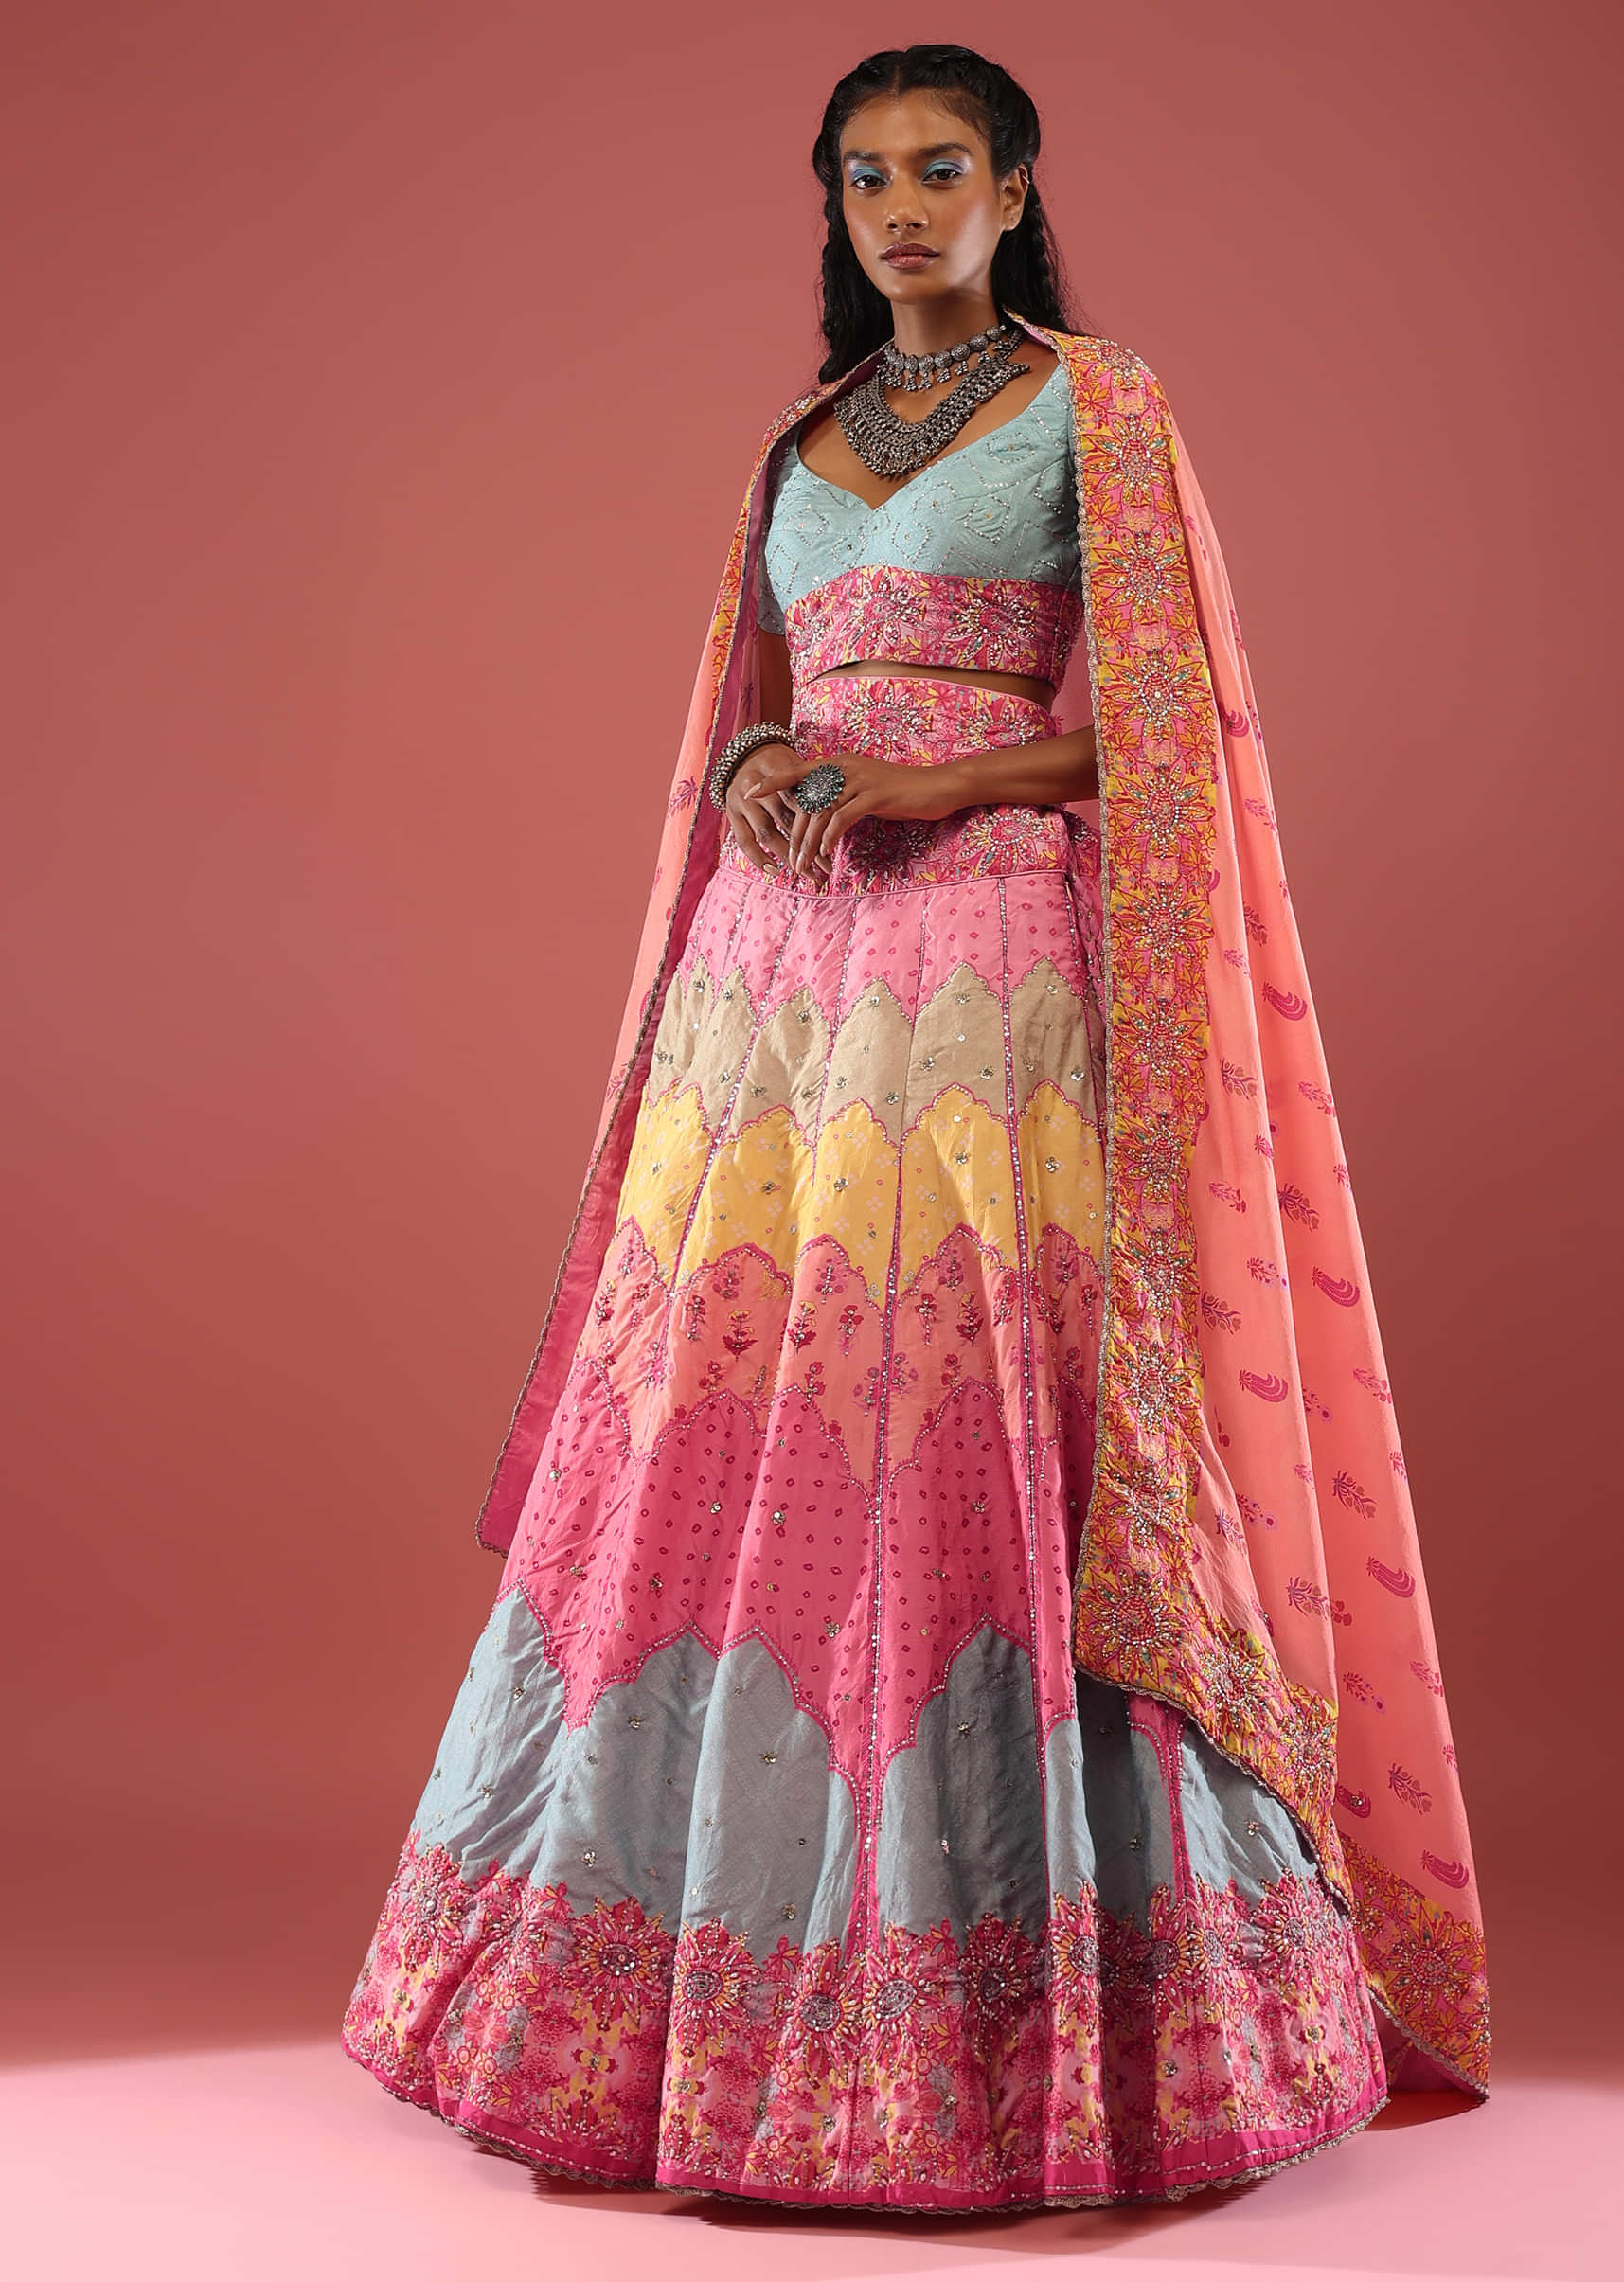 Multi Coloured Bandhani Print Lehenga Choli In Silk Inspired From Mughal Architecture And Hand Embroidery Detailing